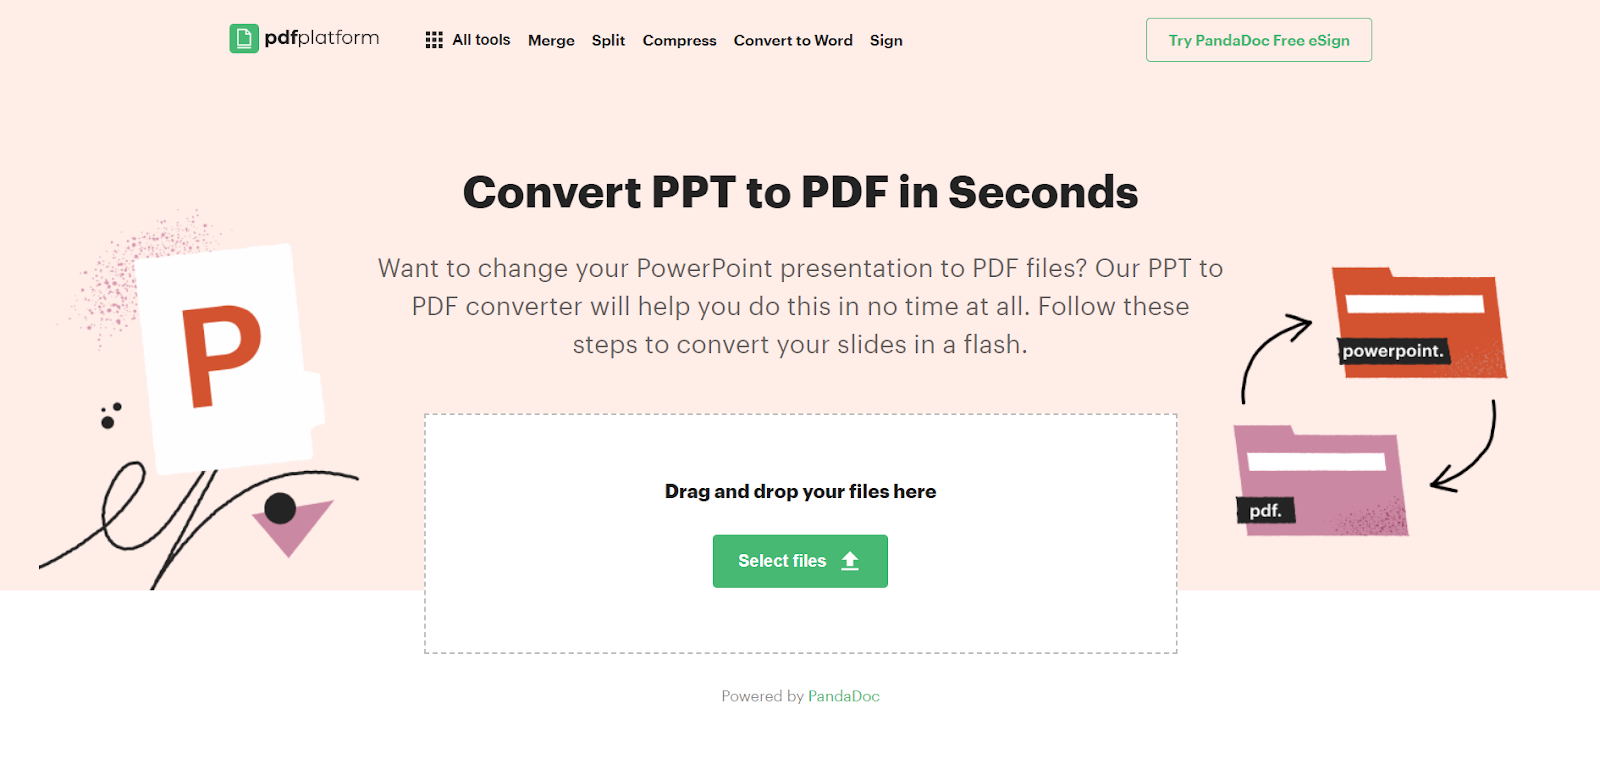 Converting PPT to PDF with PDFplatform